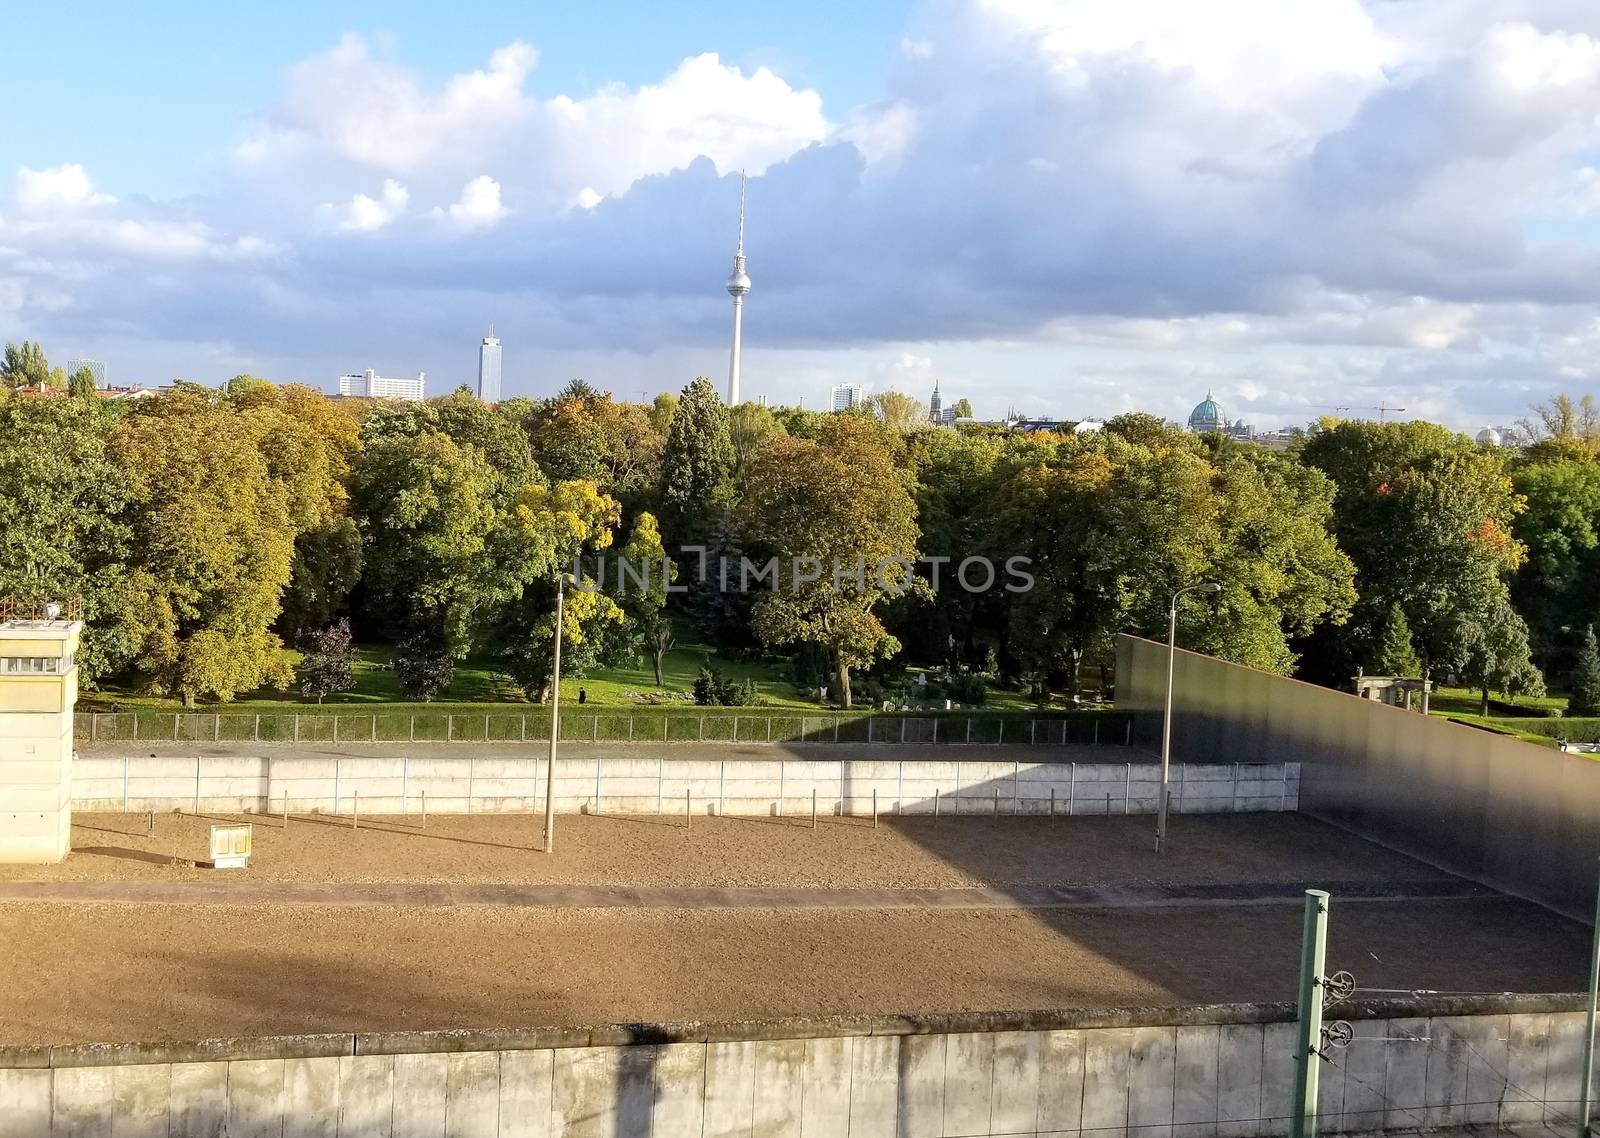 Berlin wall in Germany displayed outdoors for tourist.